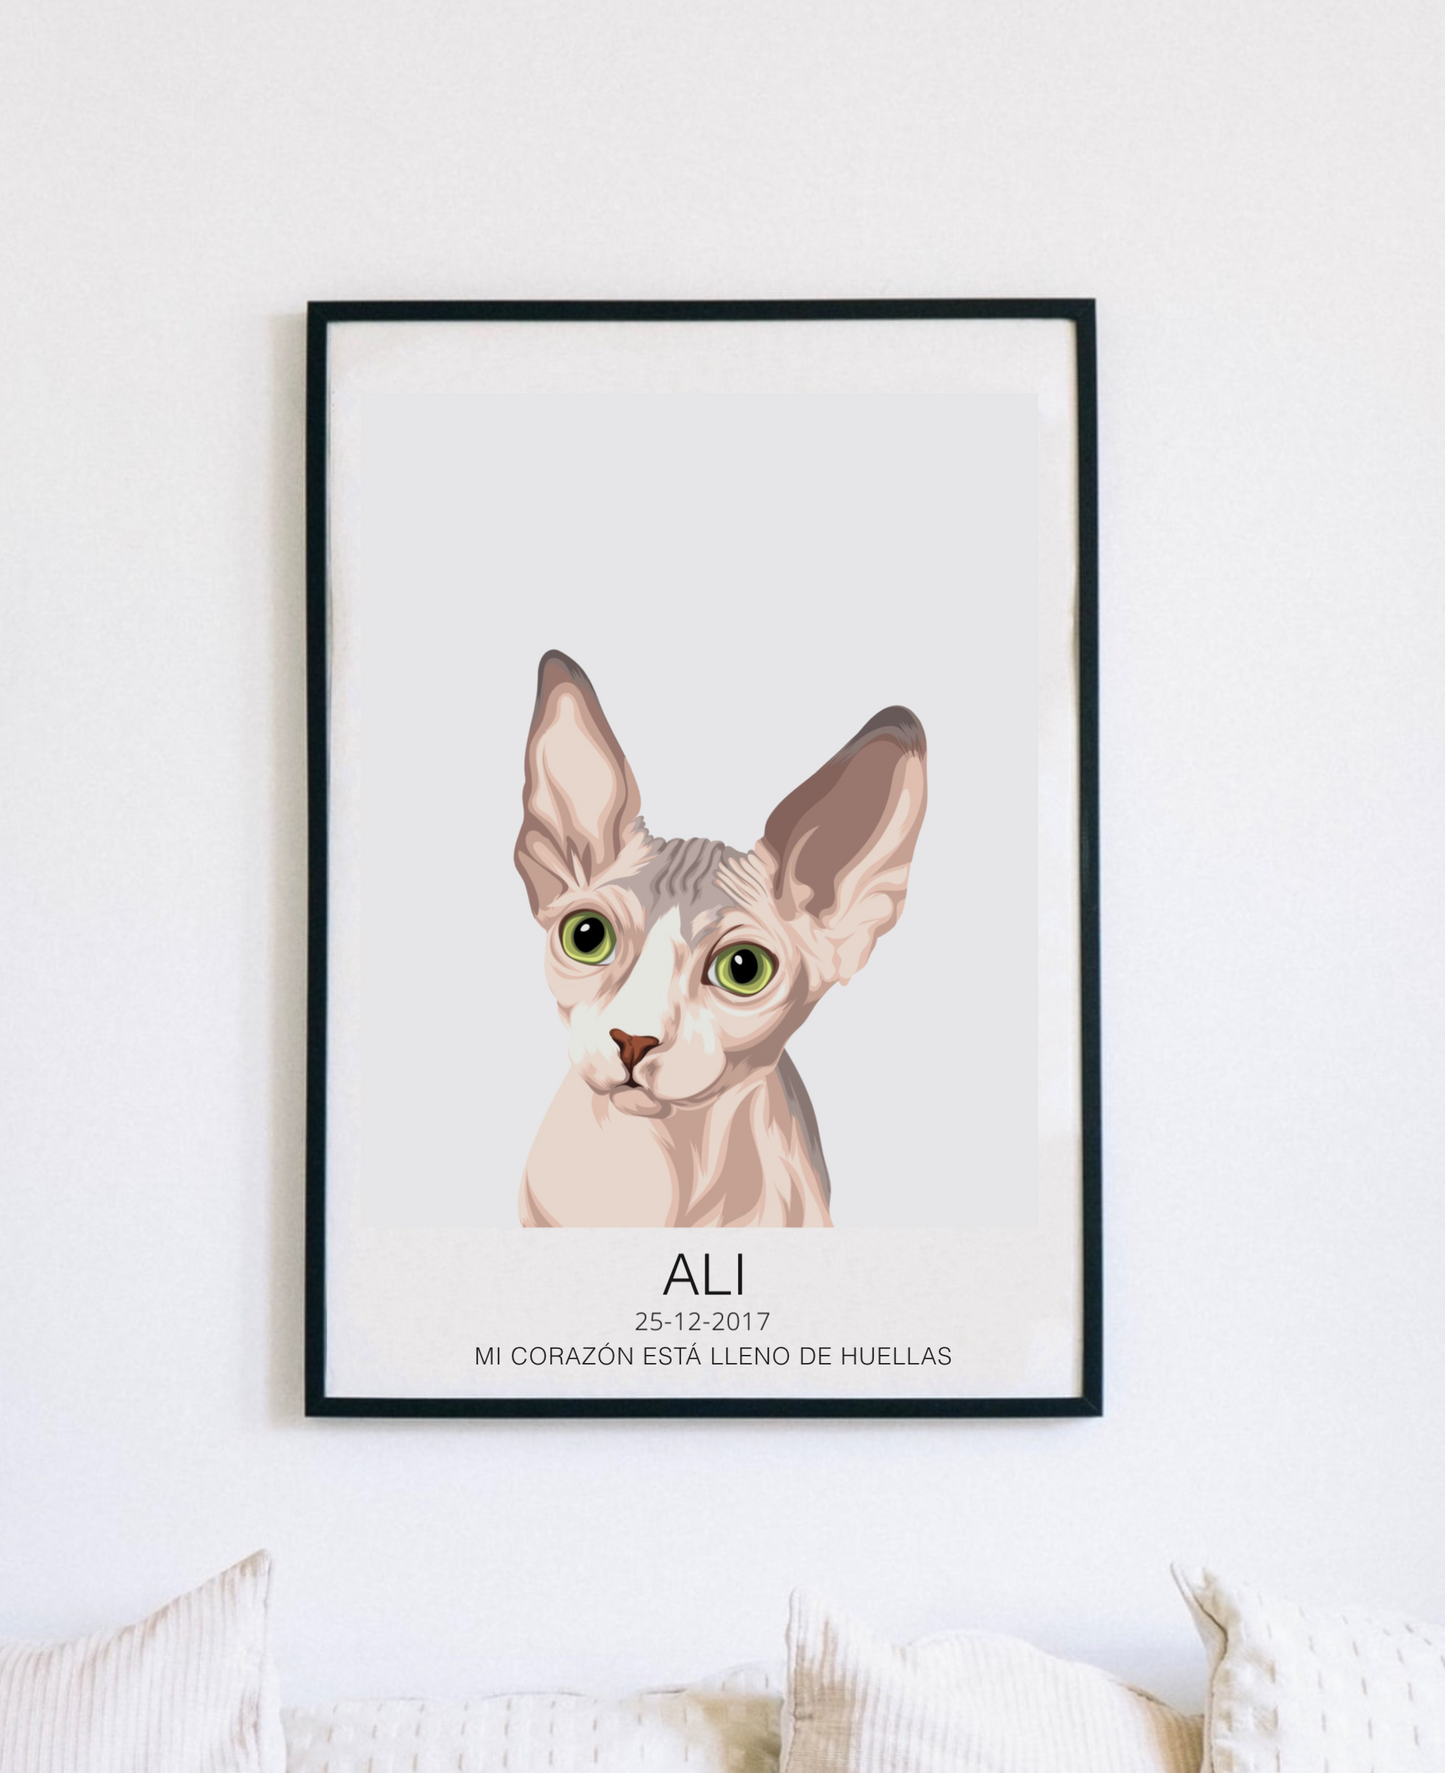 Pet portrait with phrase and date